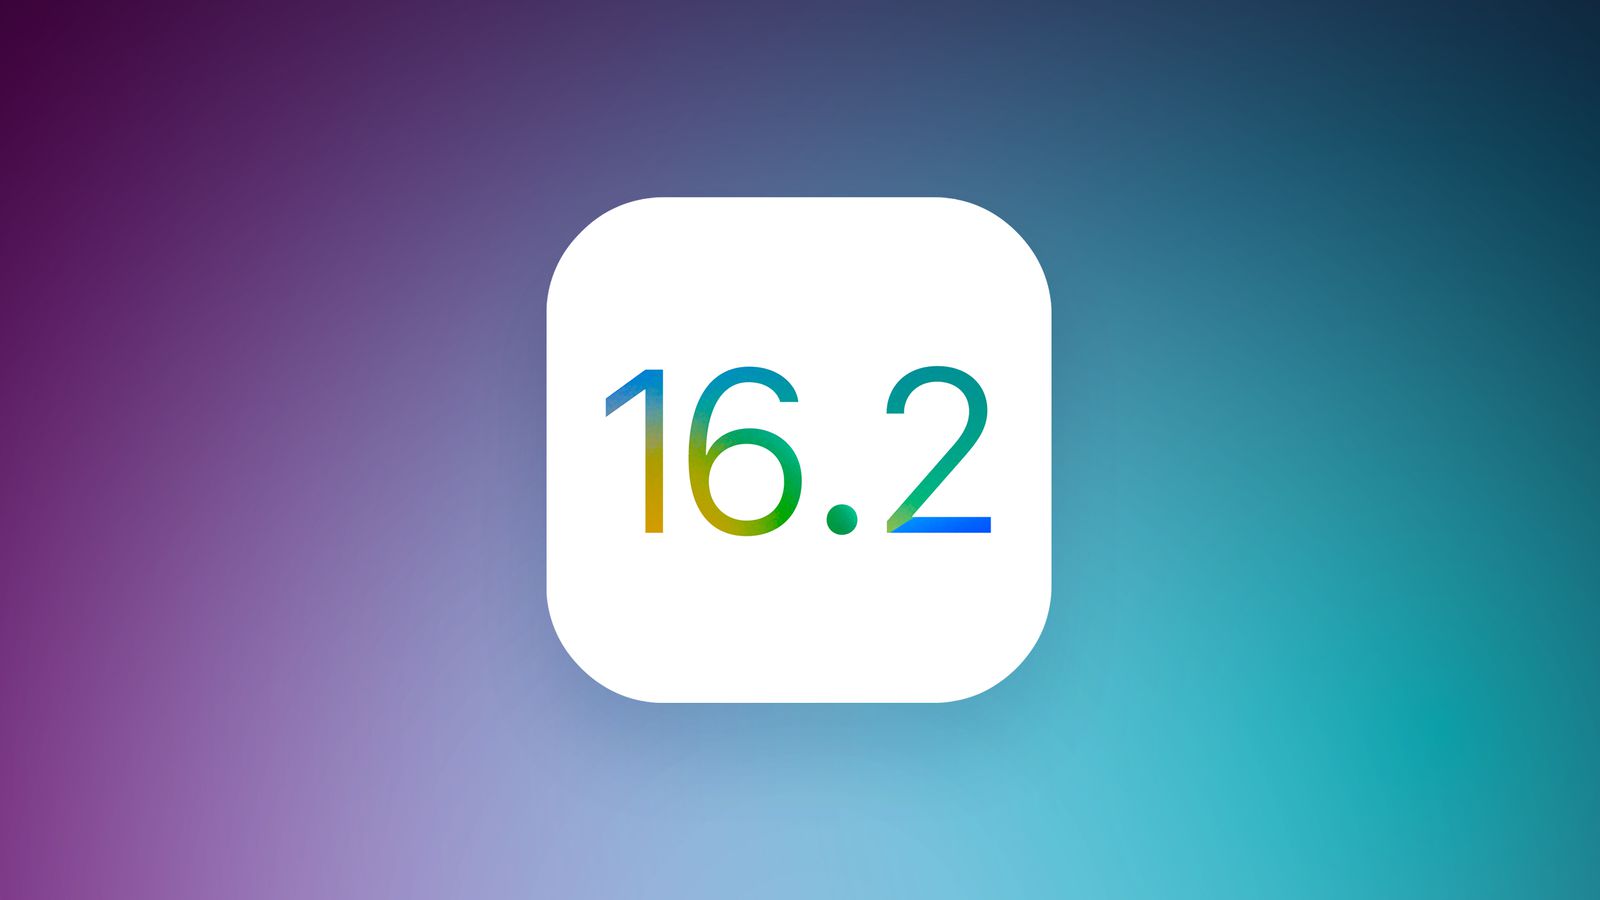 Apple Releases iOS 16.2 and iPadOS 16.2 With Freeform, Apple Music Sing,  Advanced Data Protection and More - MacRumors